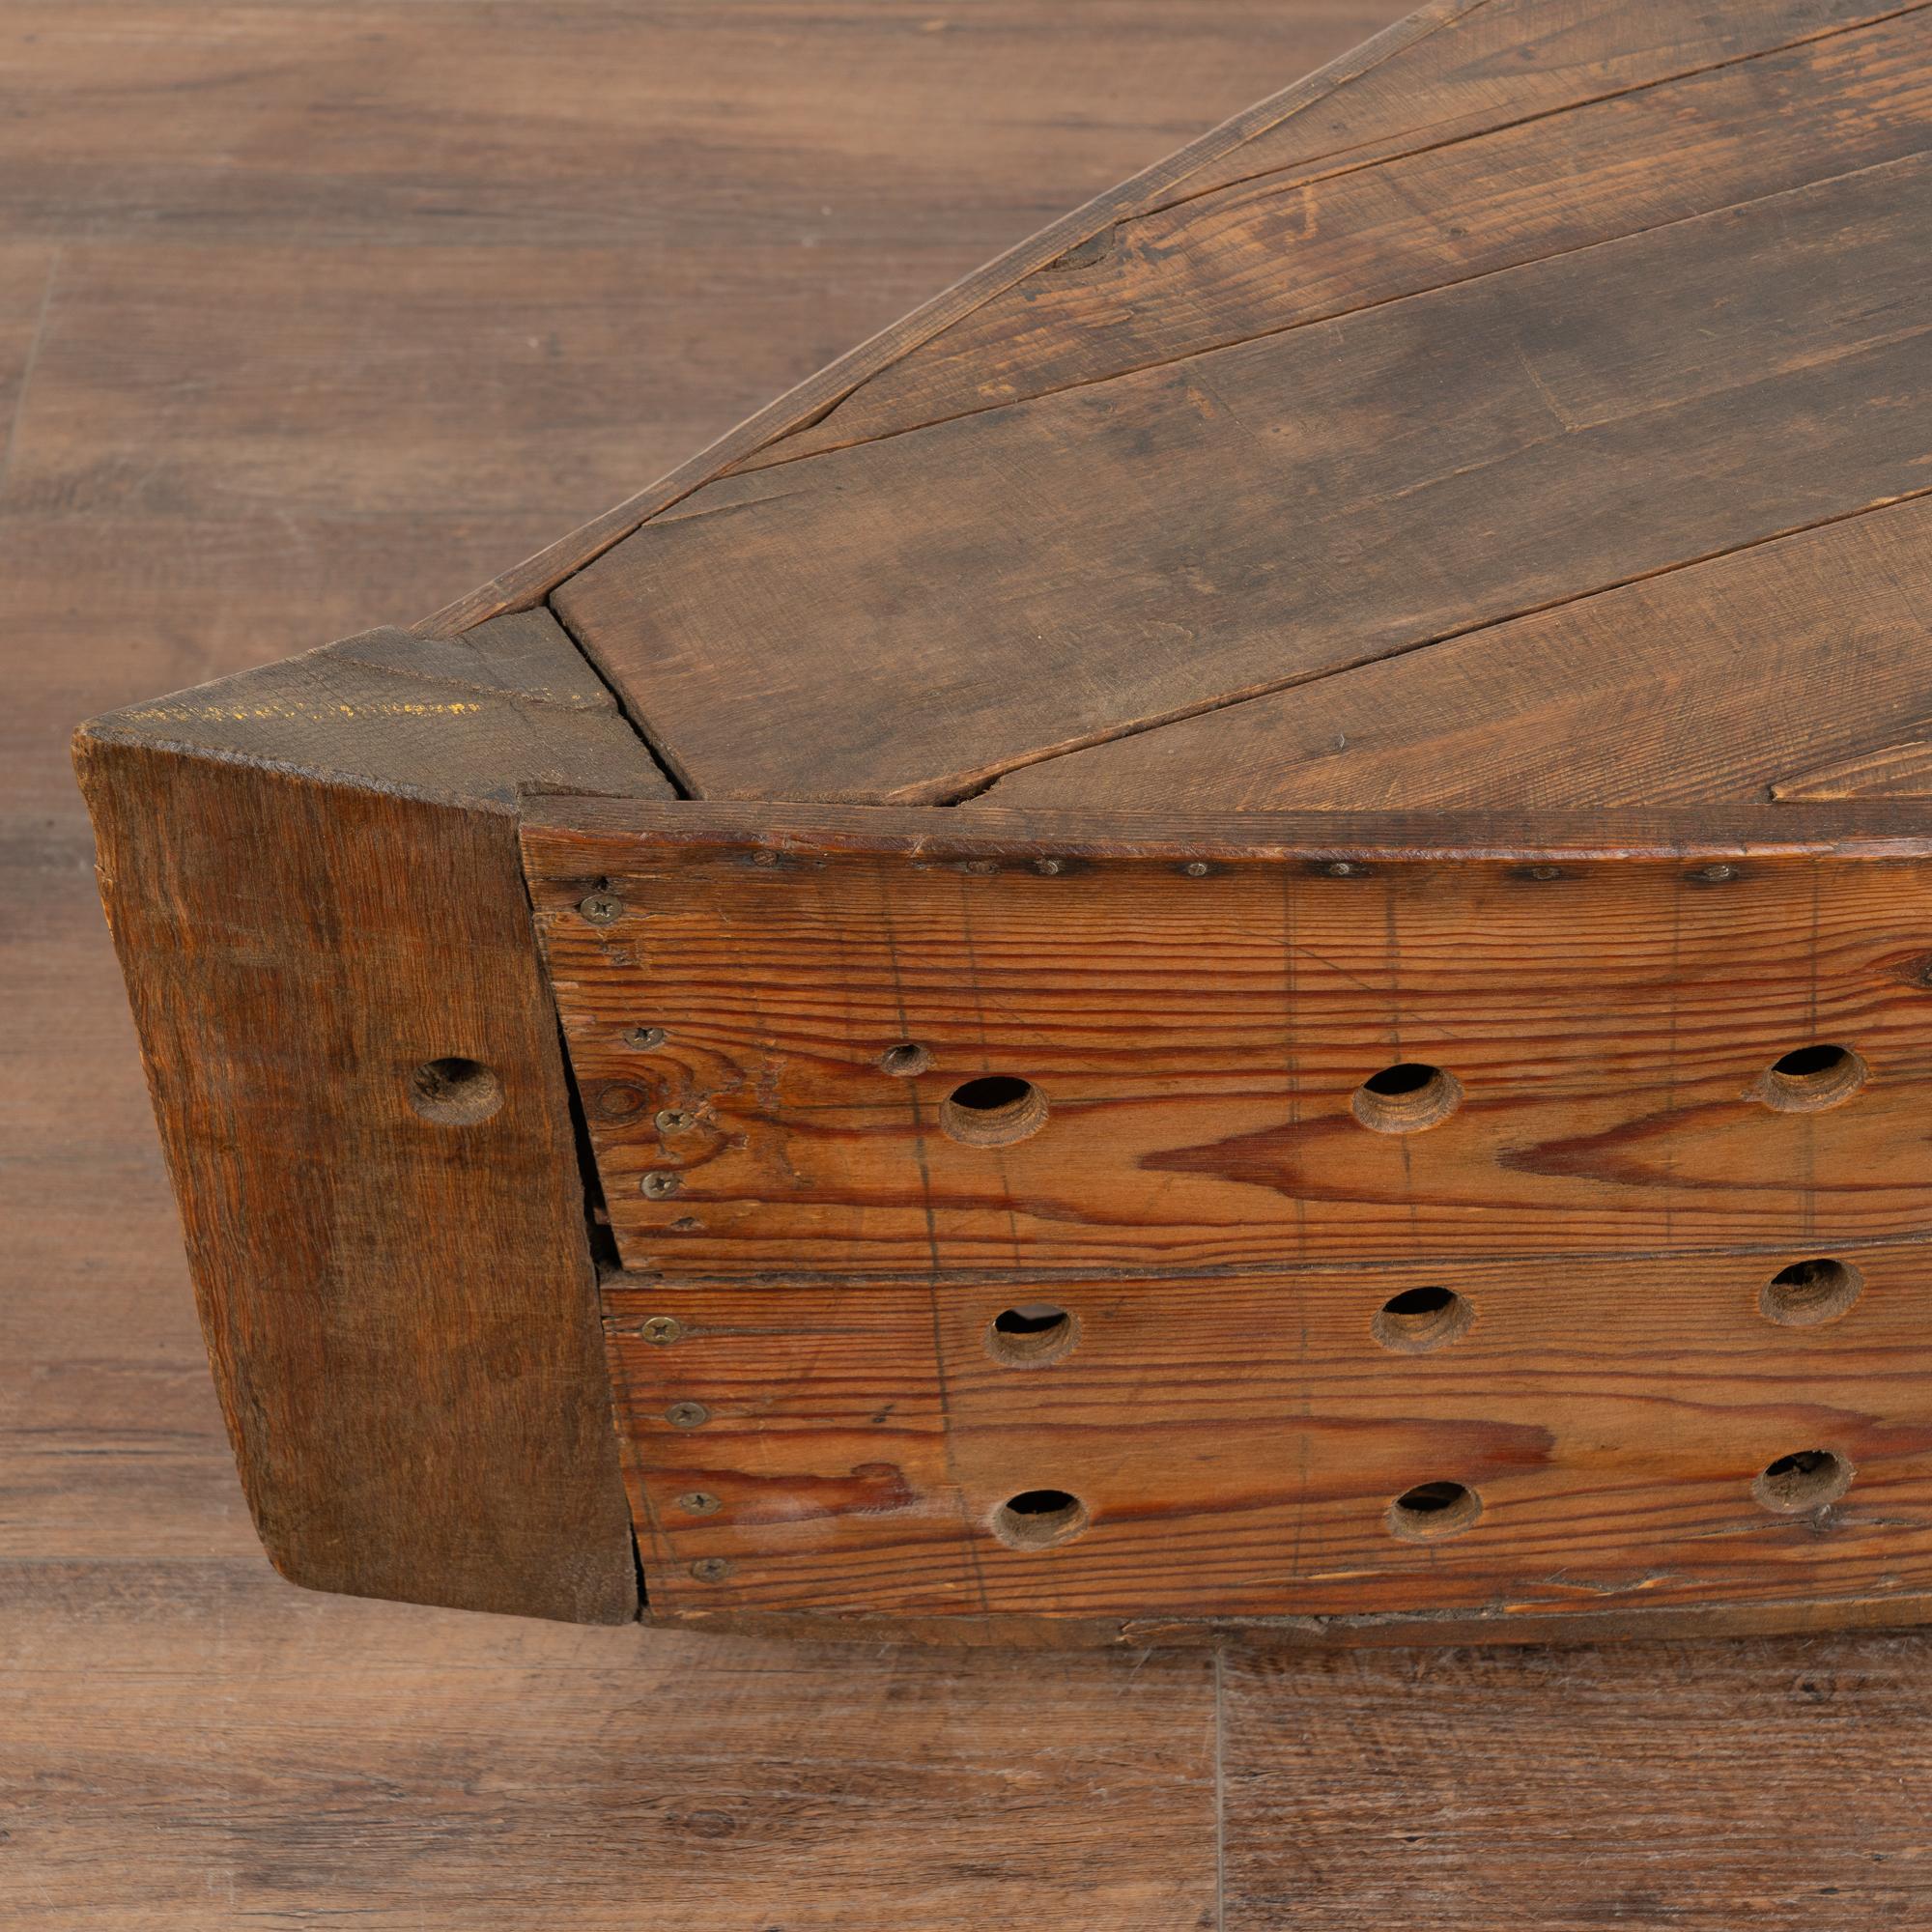 20th Century Rustic Decorative Model Boat With Holes For Fishing or Large Creel, circa 1940 For Sale